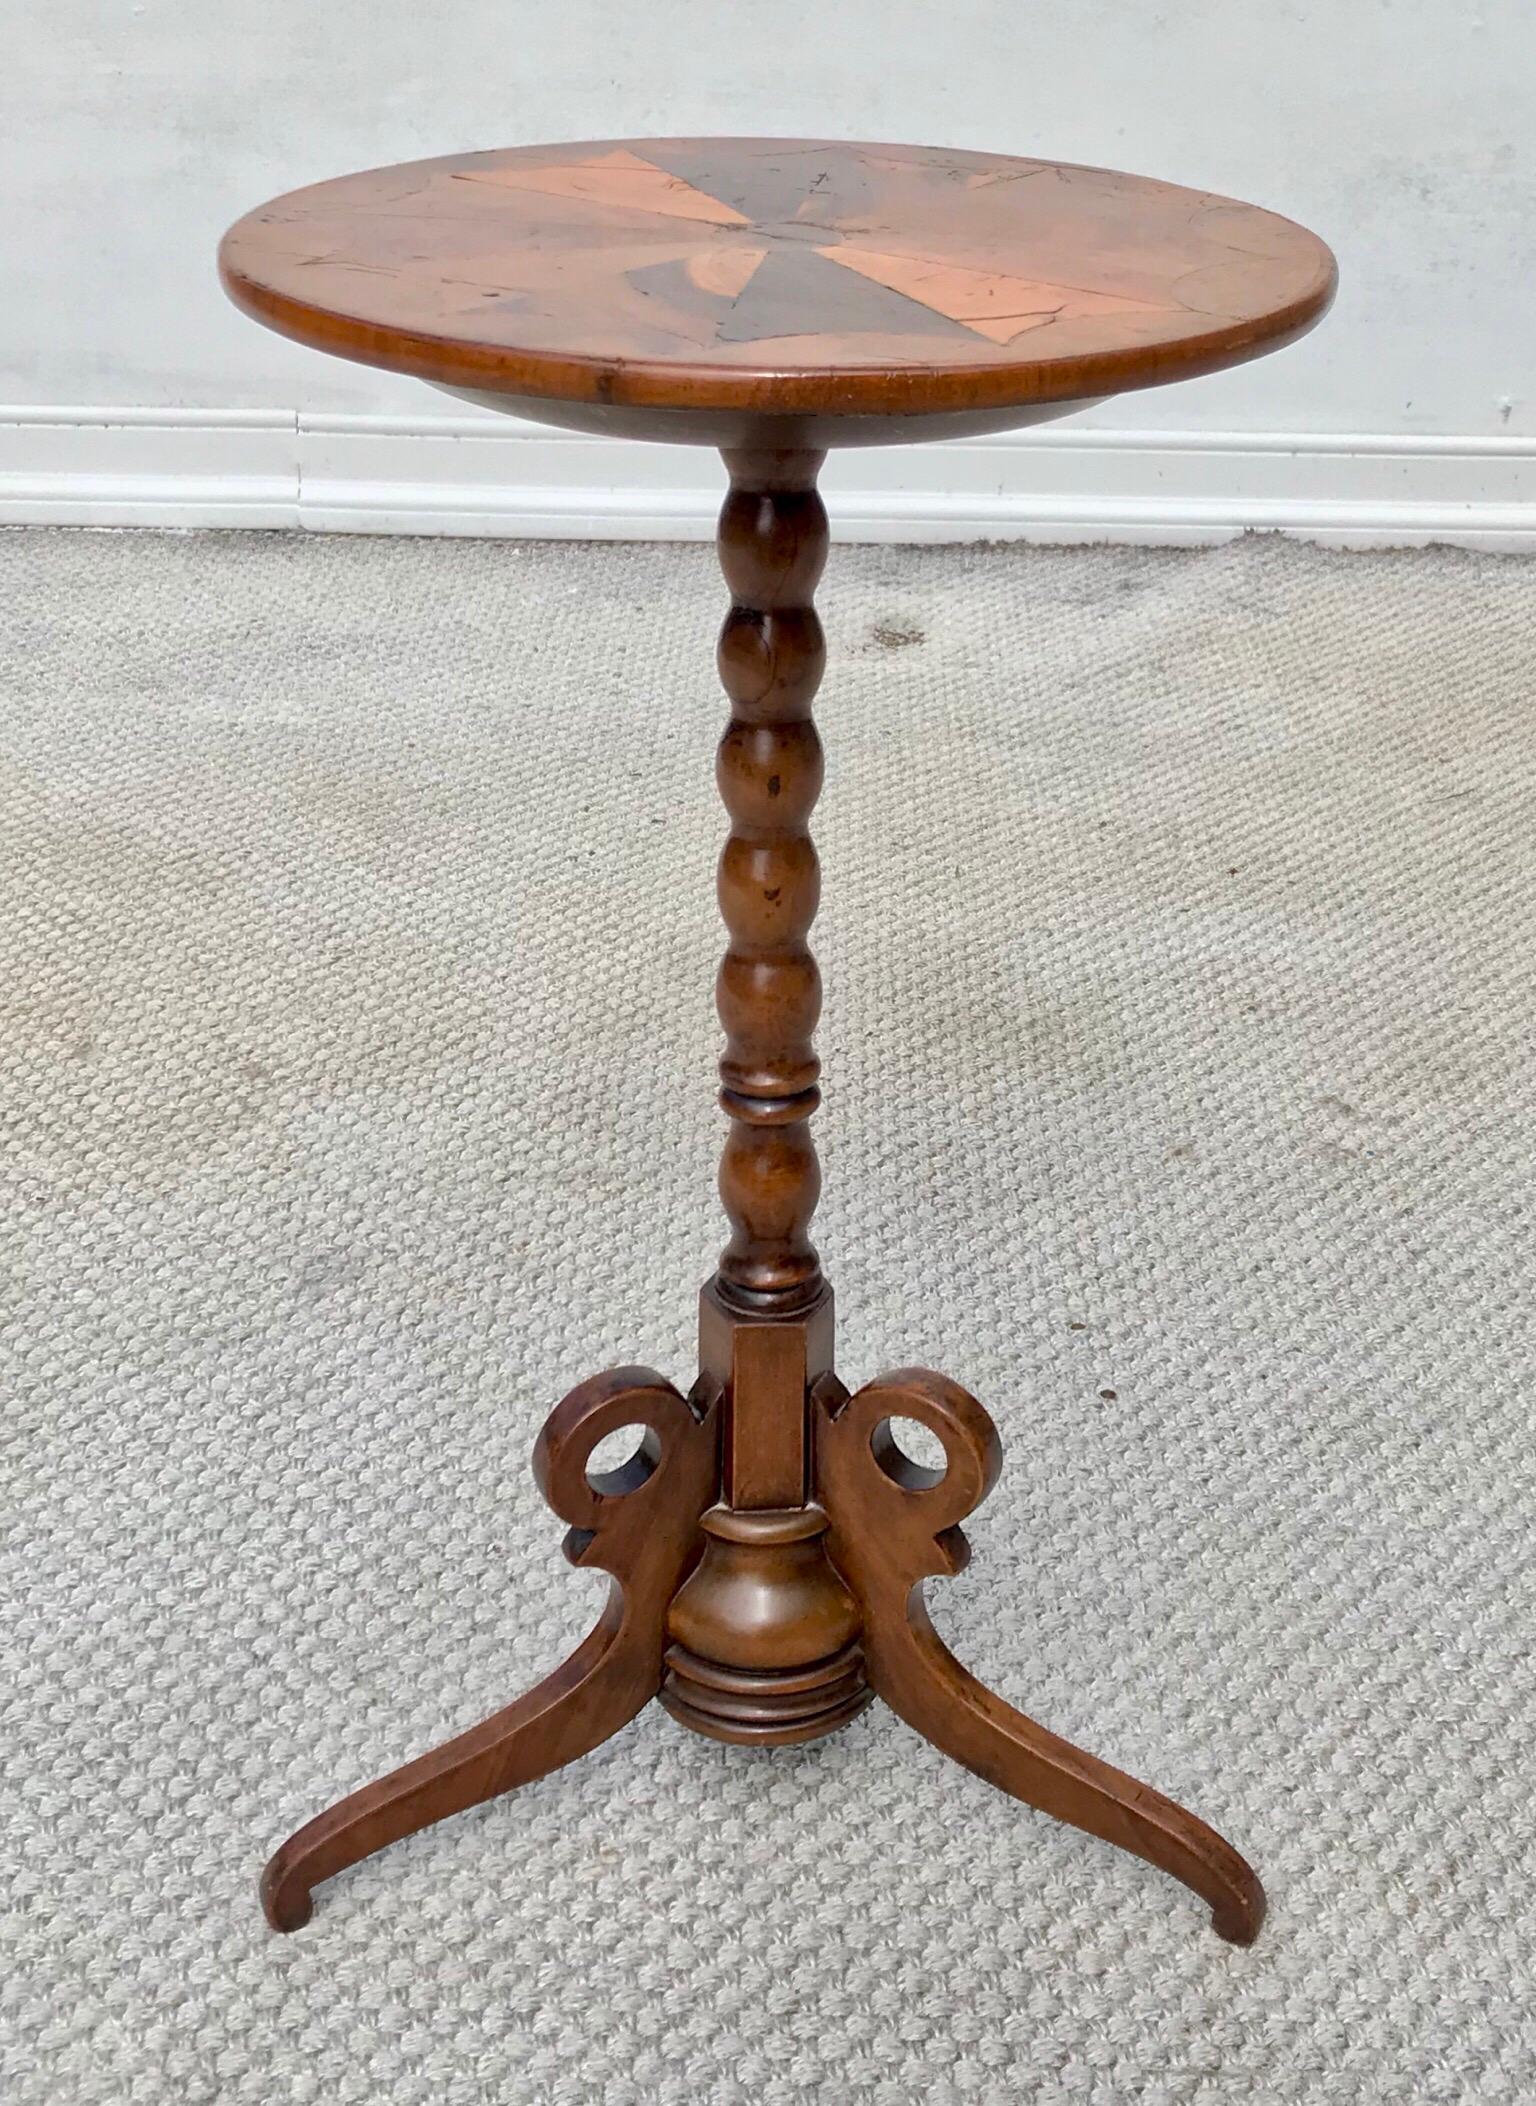 Late 19th century Italian candle stand having a gorgeous burl wood top that features a central fan inlay detail. Refinished in the late 20th century, the stand is strong and sturdy and ready for lots of everyday use in any fine interior.